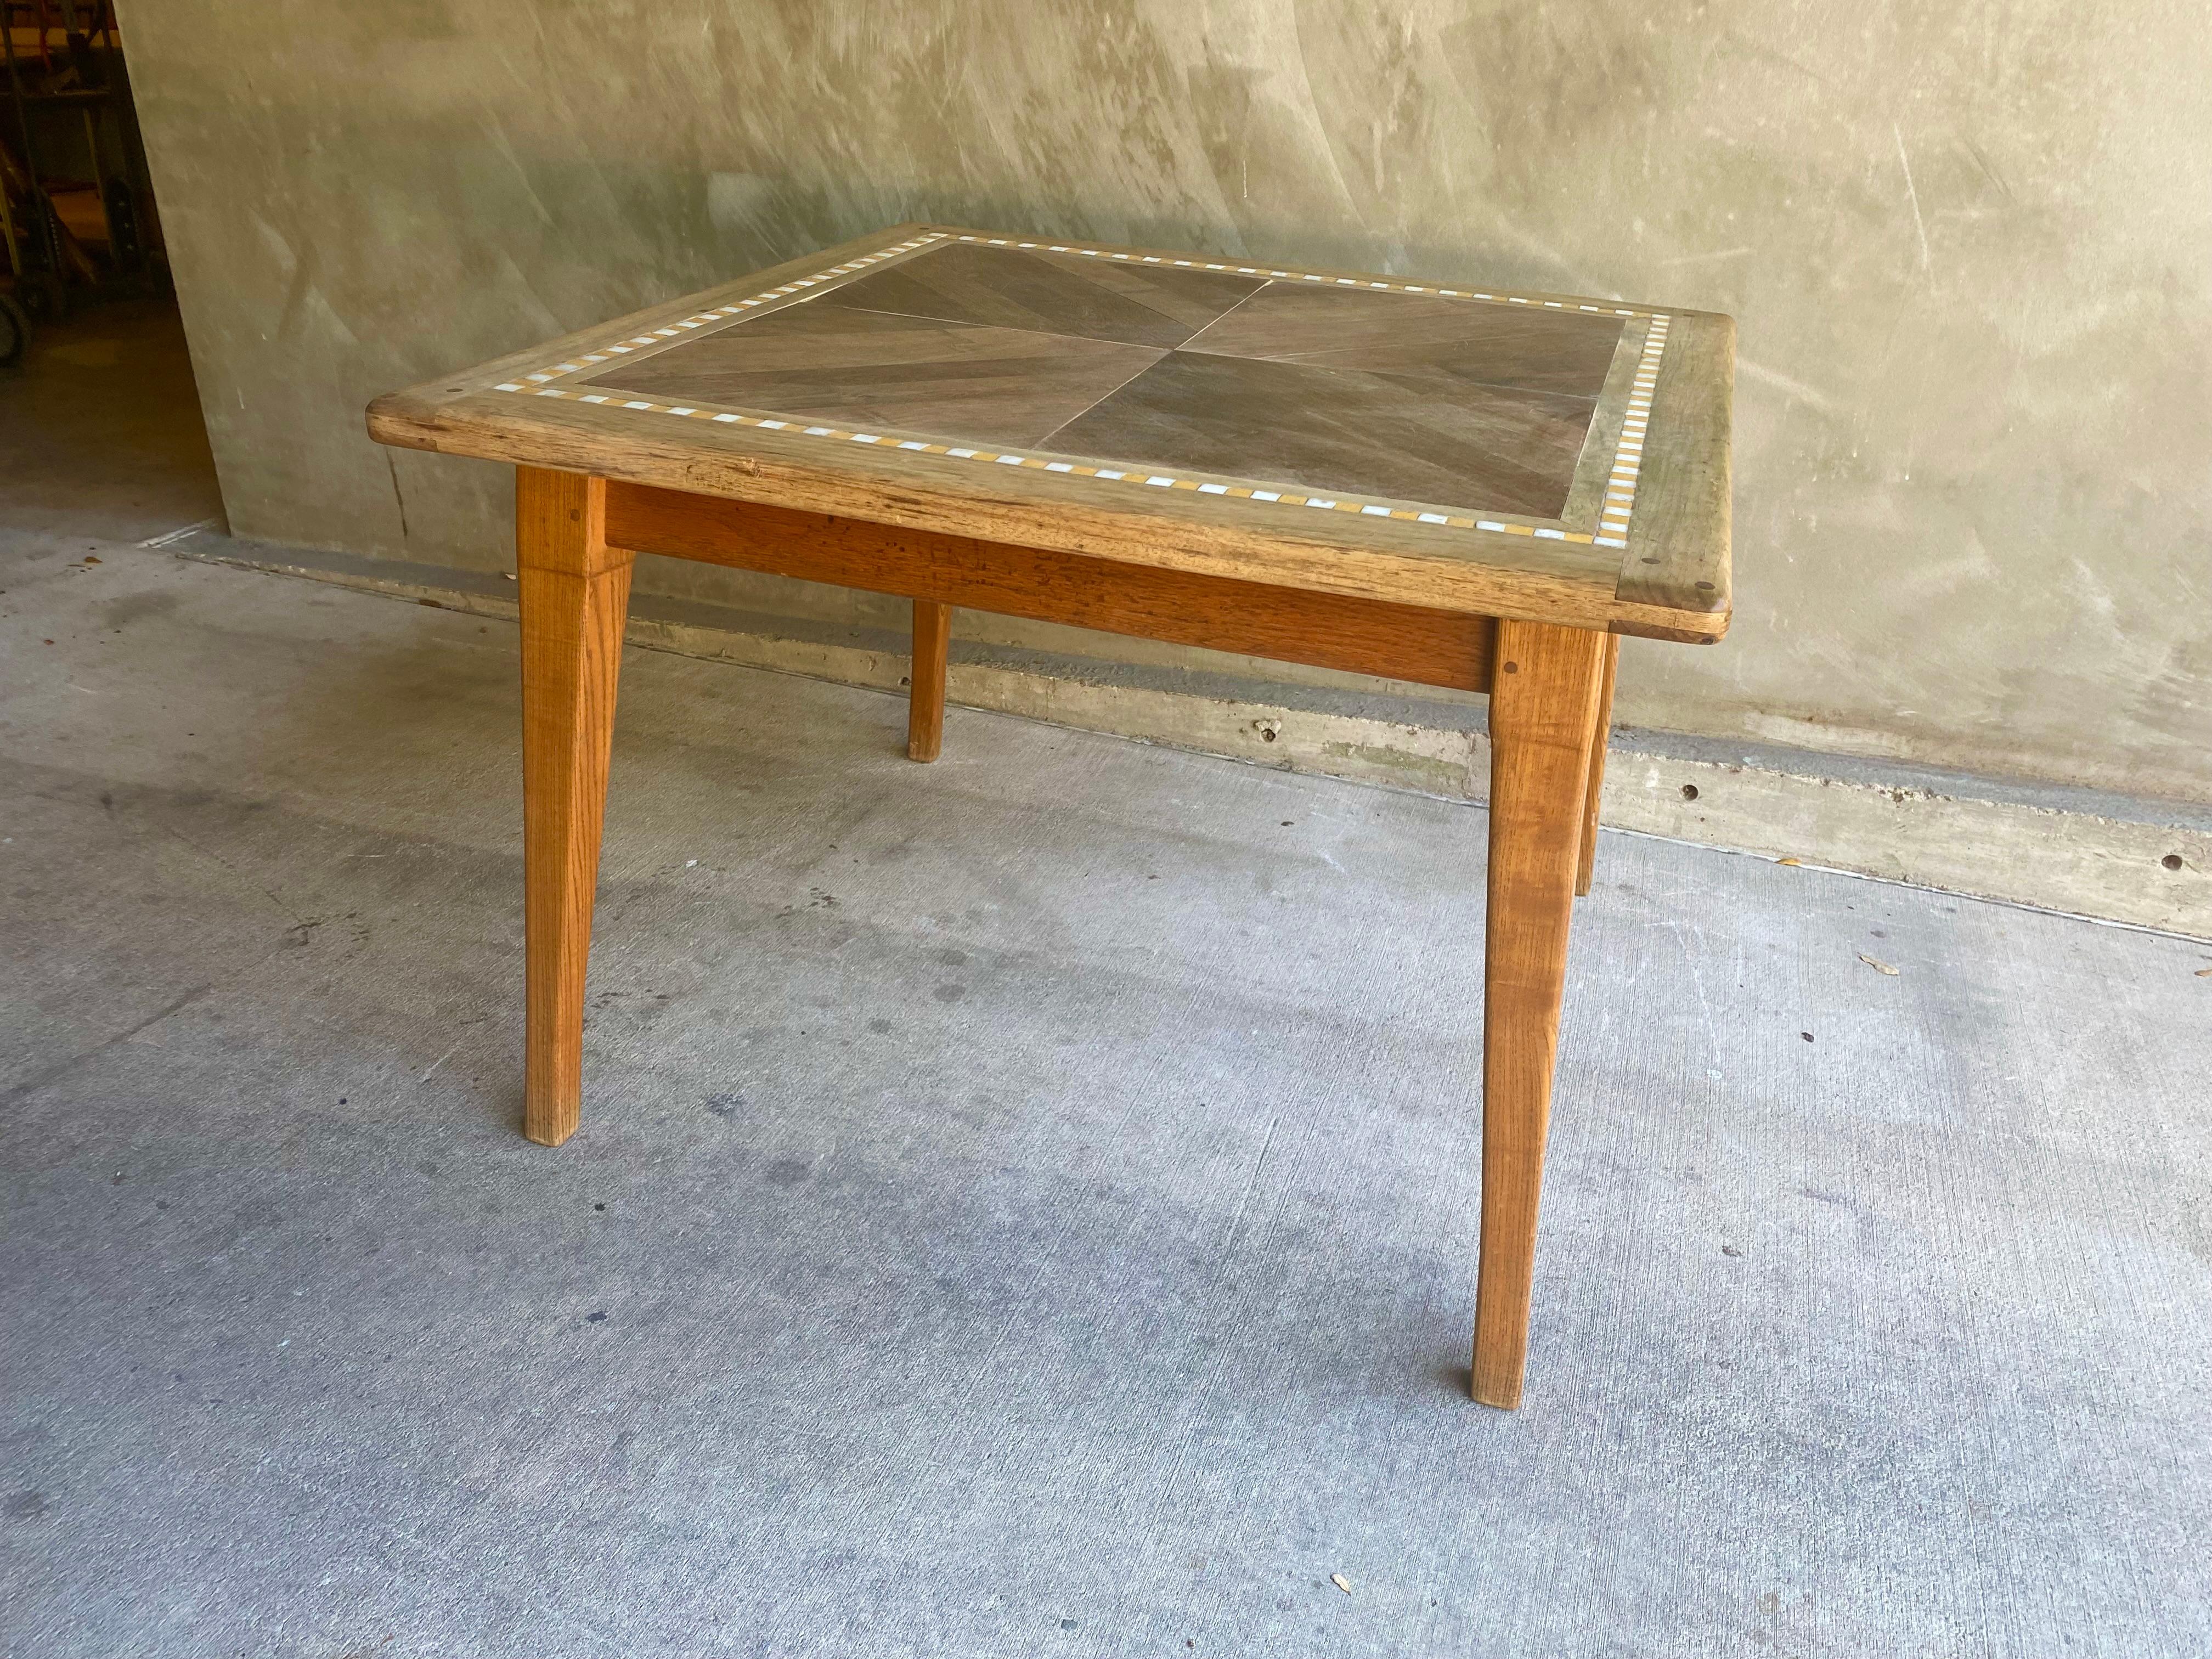 Clean lined French mid-century dining table, square, in oak with yellow/gold and white tile accent at perimeter. Inlayed top and angular legs. Perfect game table size. France, 1950's.